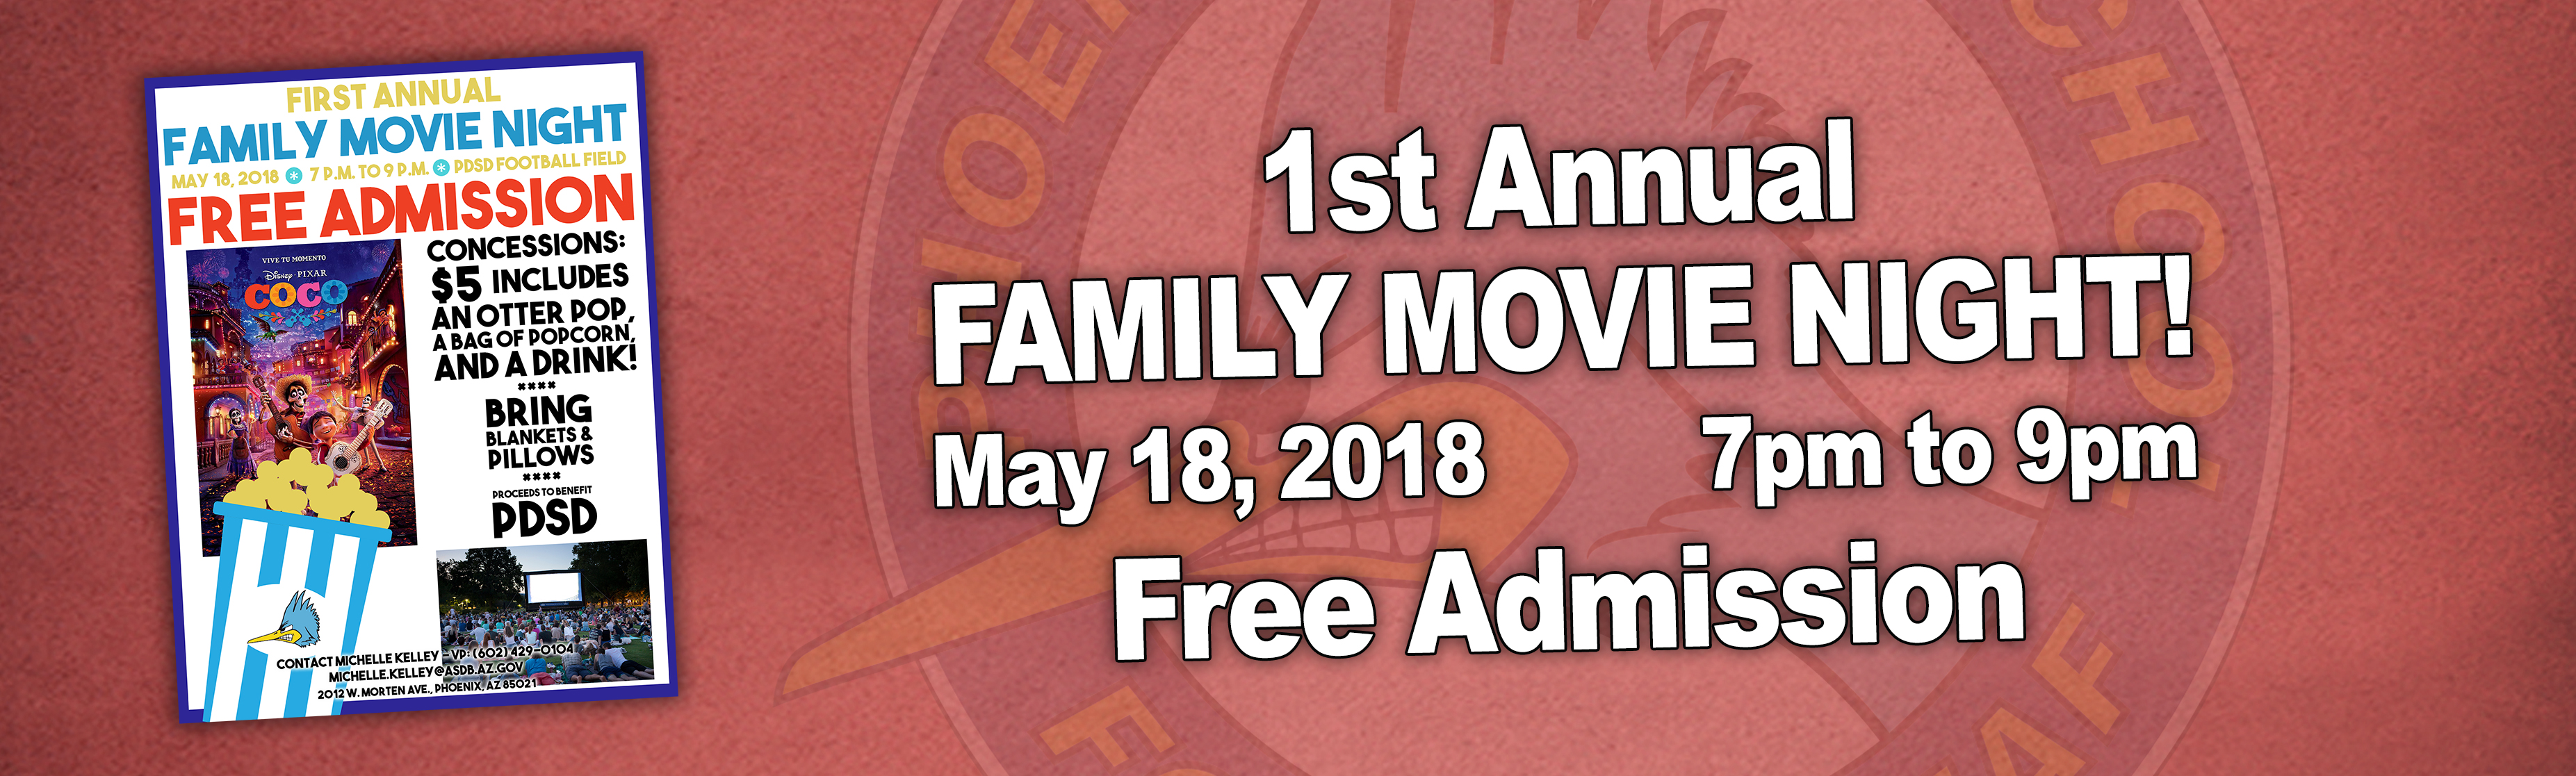 banner for family movie night on may 18, 2018 free admission